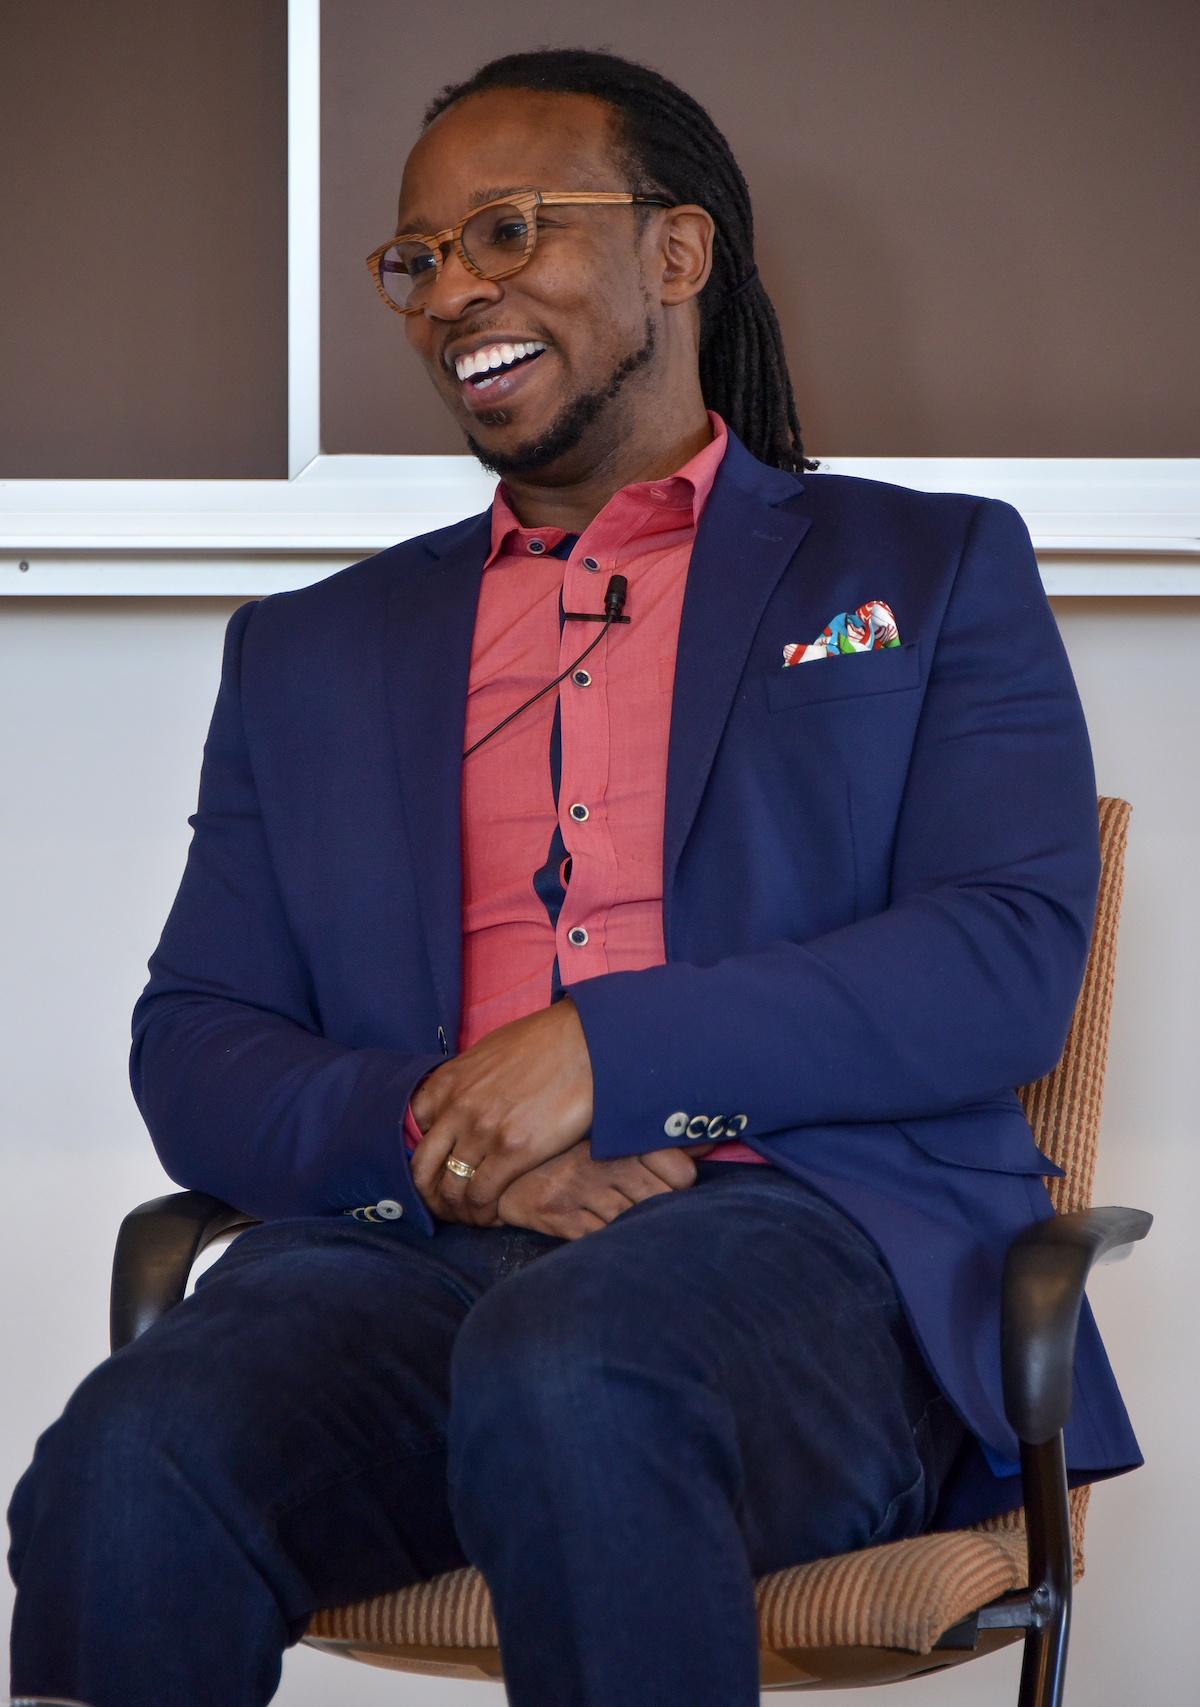 Ibram X. Kendi, Director and Founder, Center for Antiracist Research, Boston University